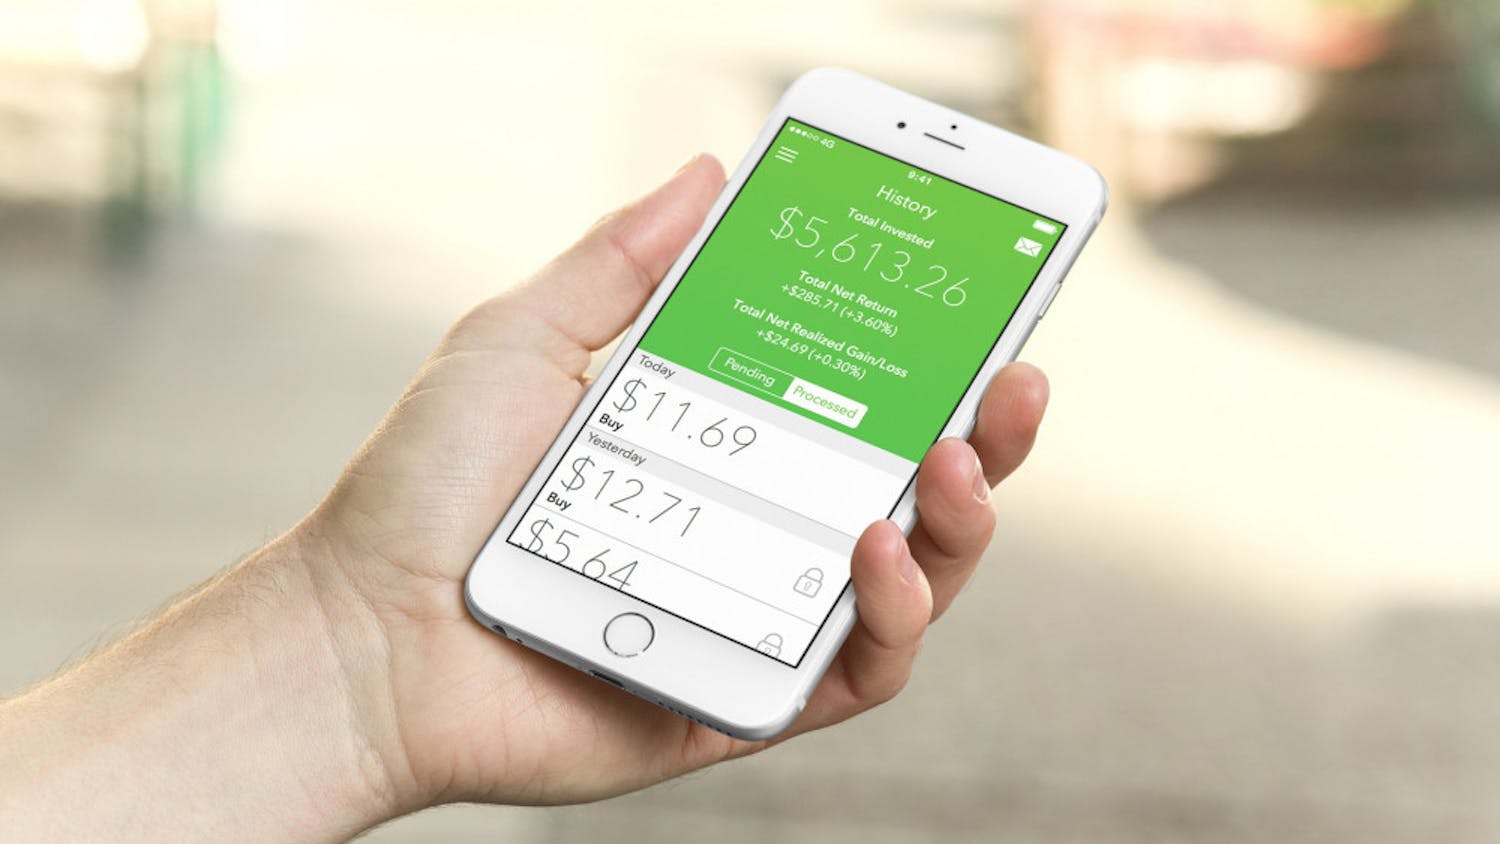 Investment app Acorns allows its users to invest their spare change in the stock market. UF is among the top 50 campuses using the app, which is now free to students.